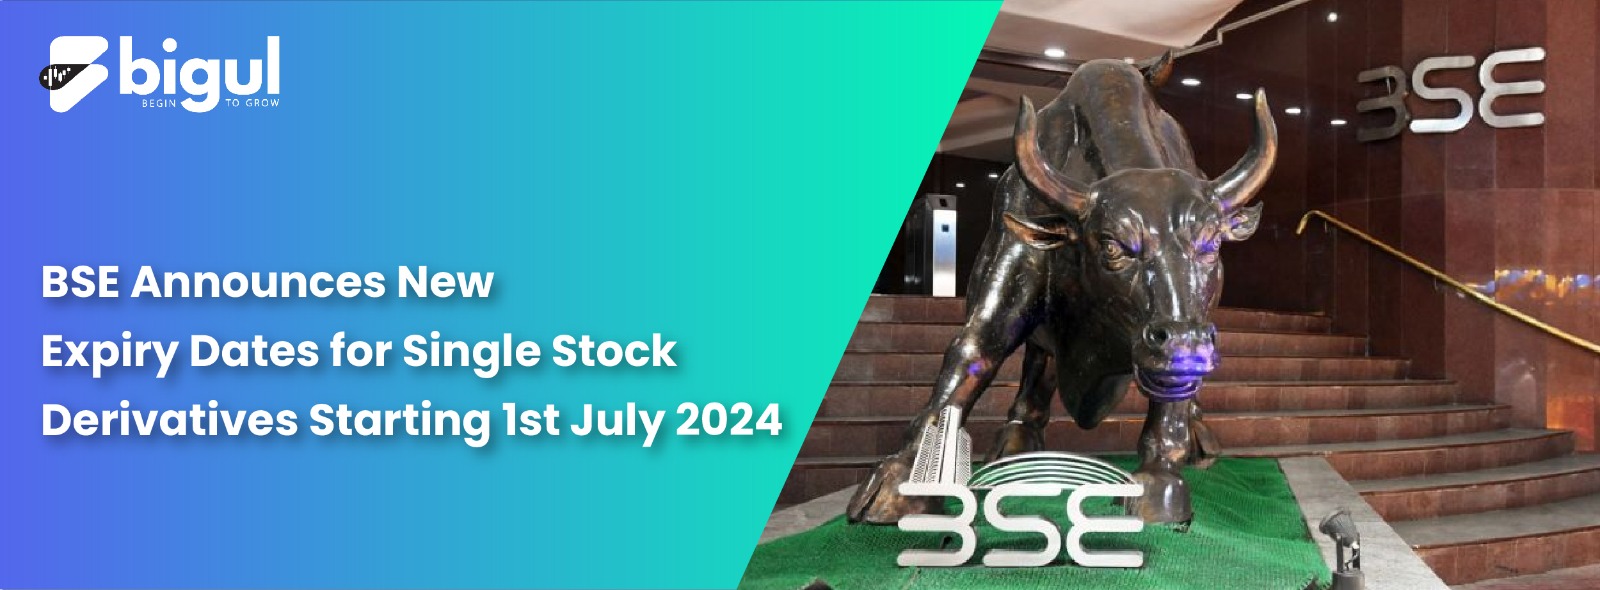 BSE Announces New Expiry Dates for Single Stock Derivatives Starting 1st July 2024